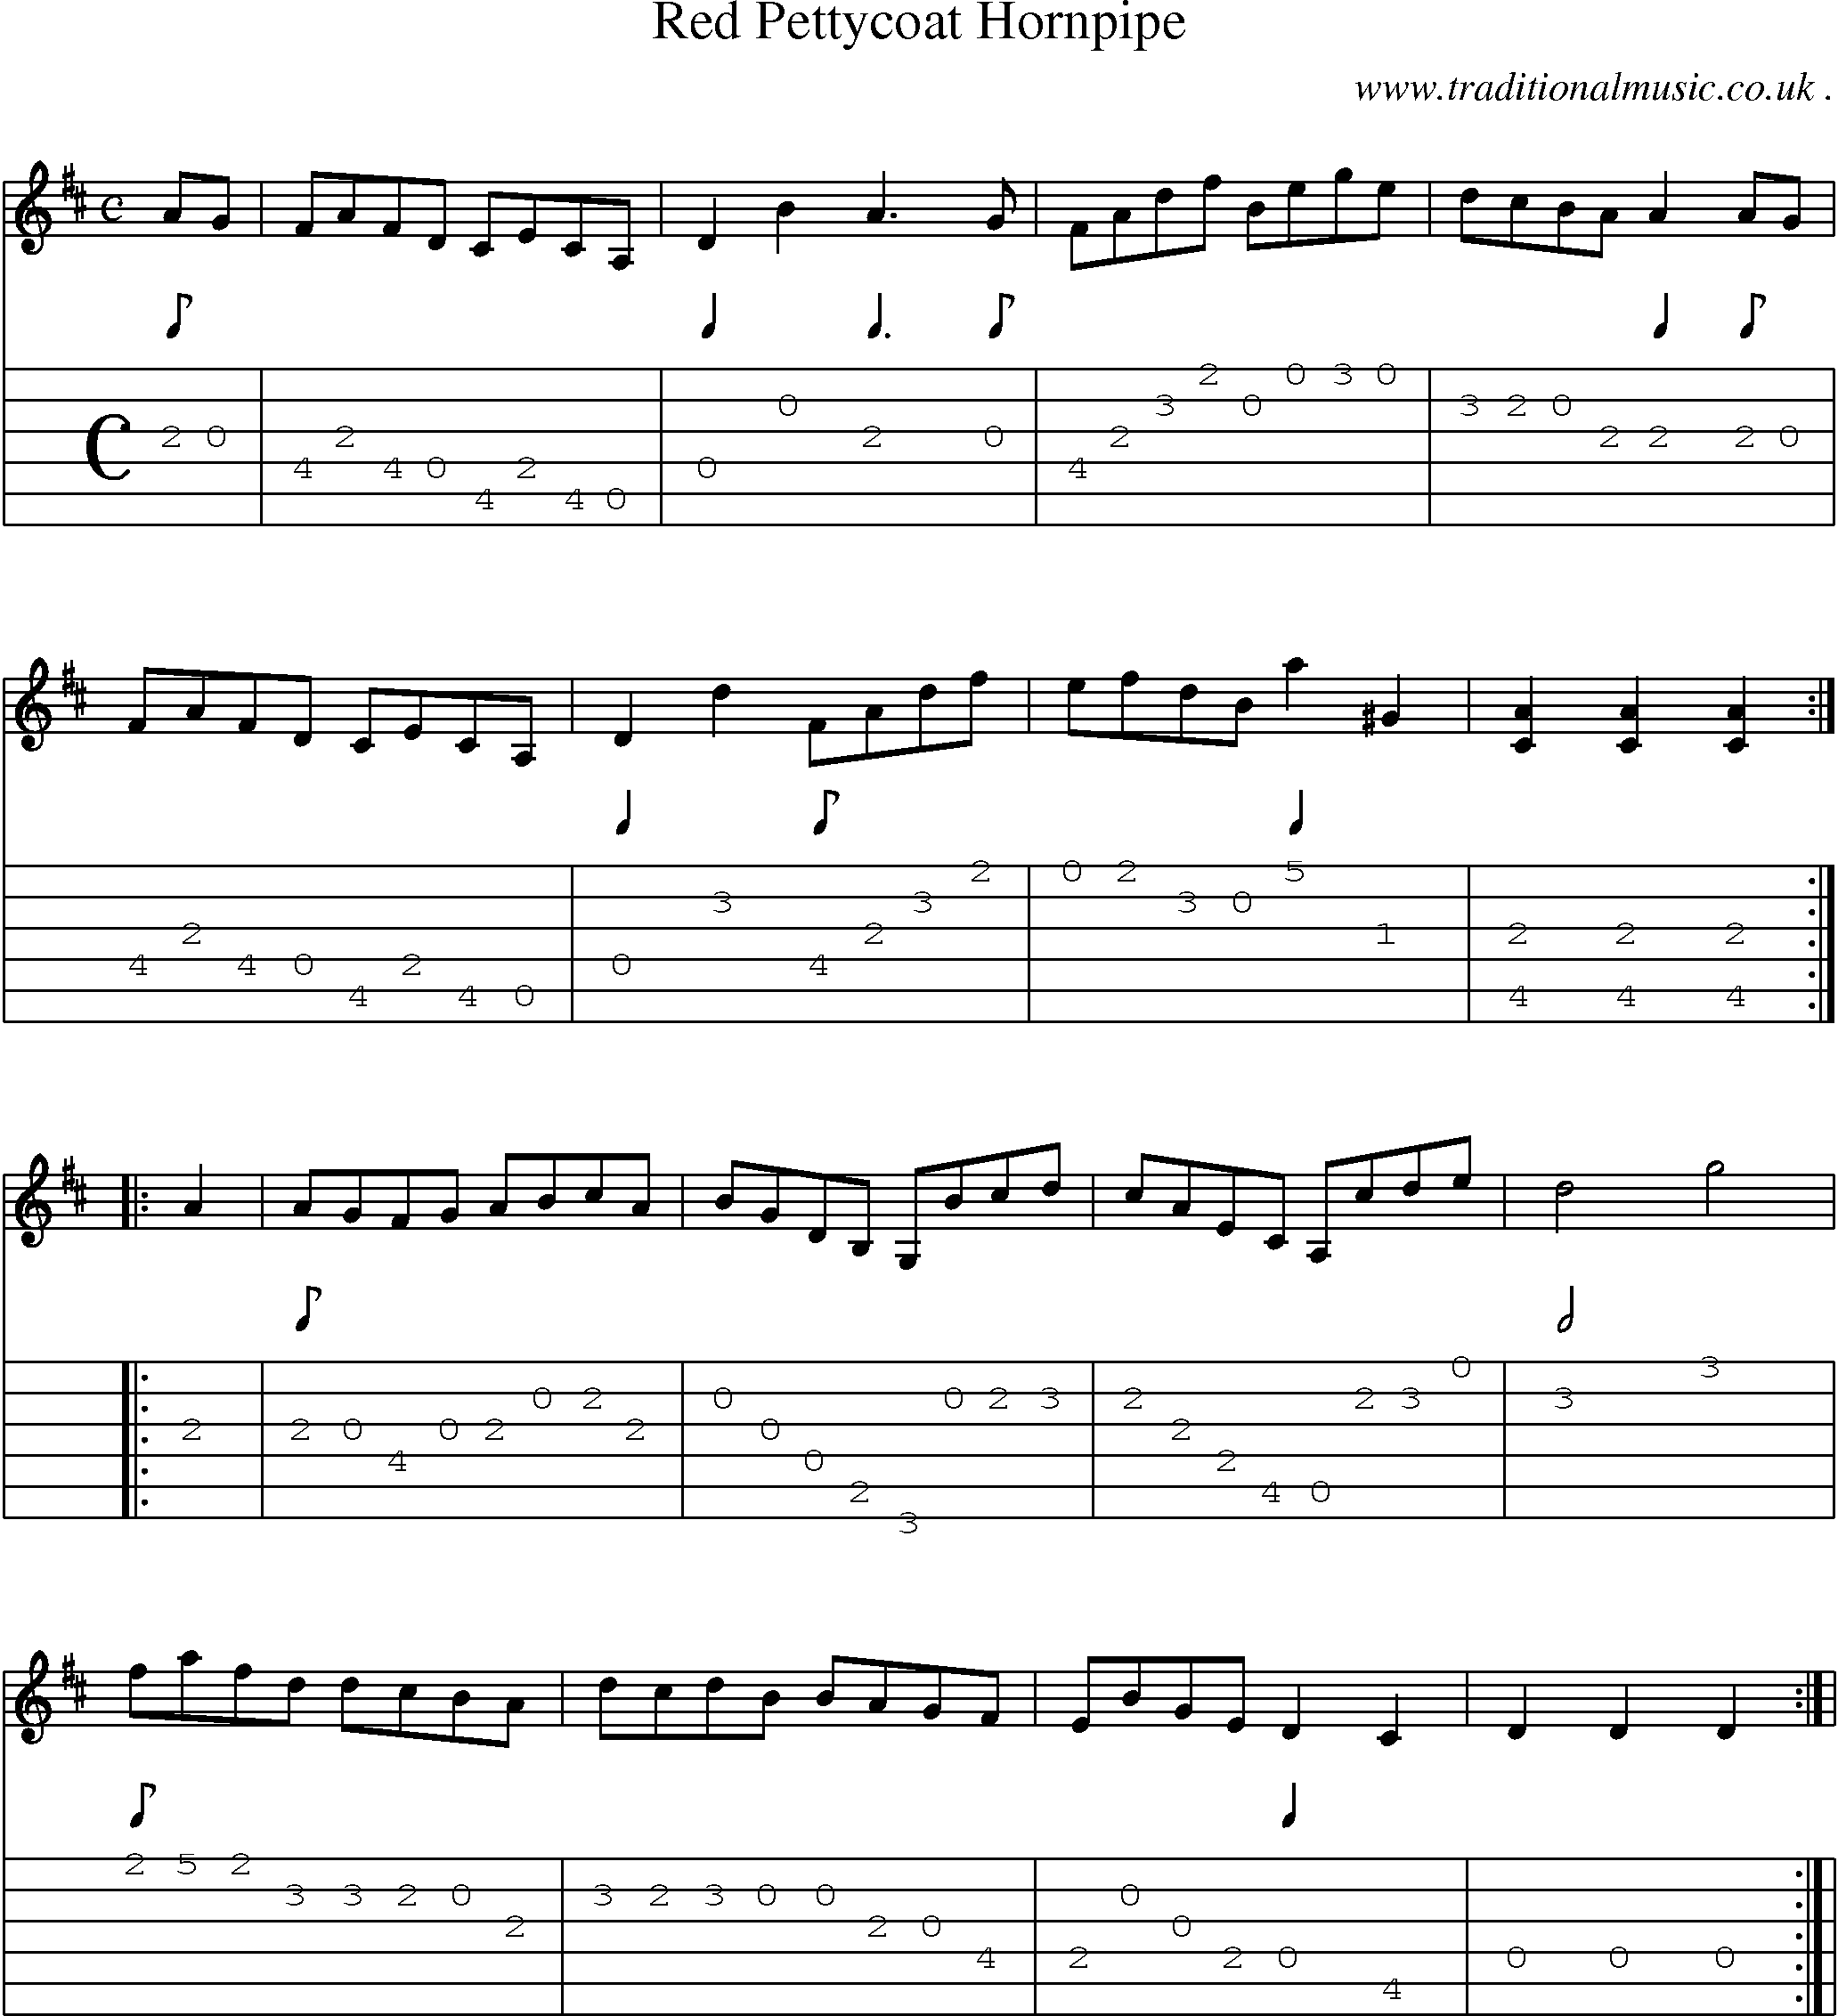 Sheet-Music and Guitar Tabs for Red Pettycoat Hornpipe